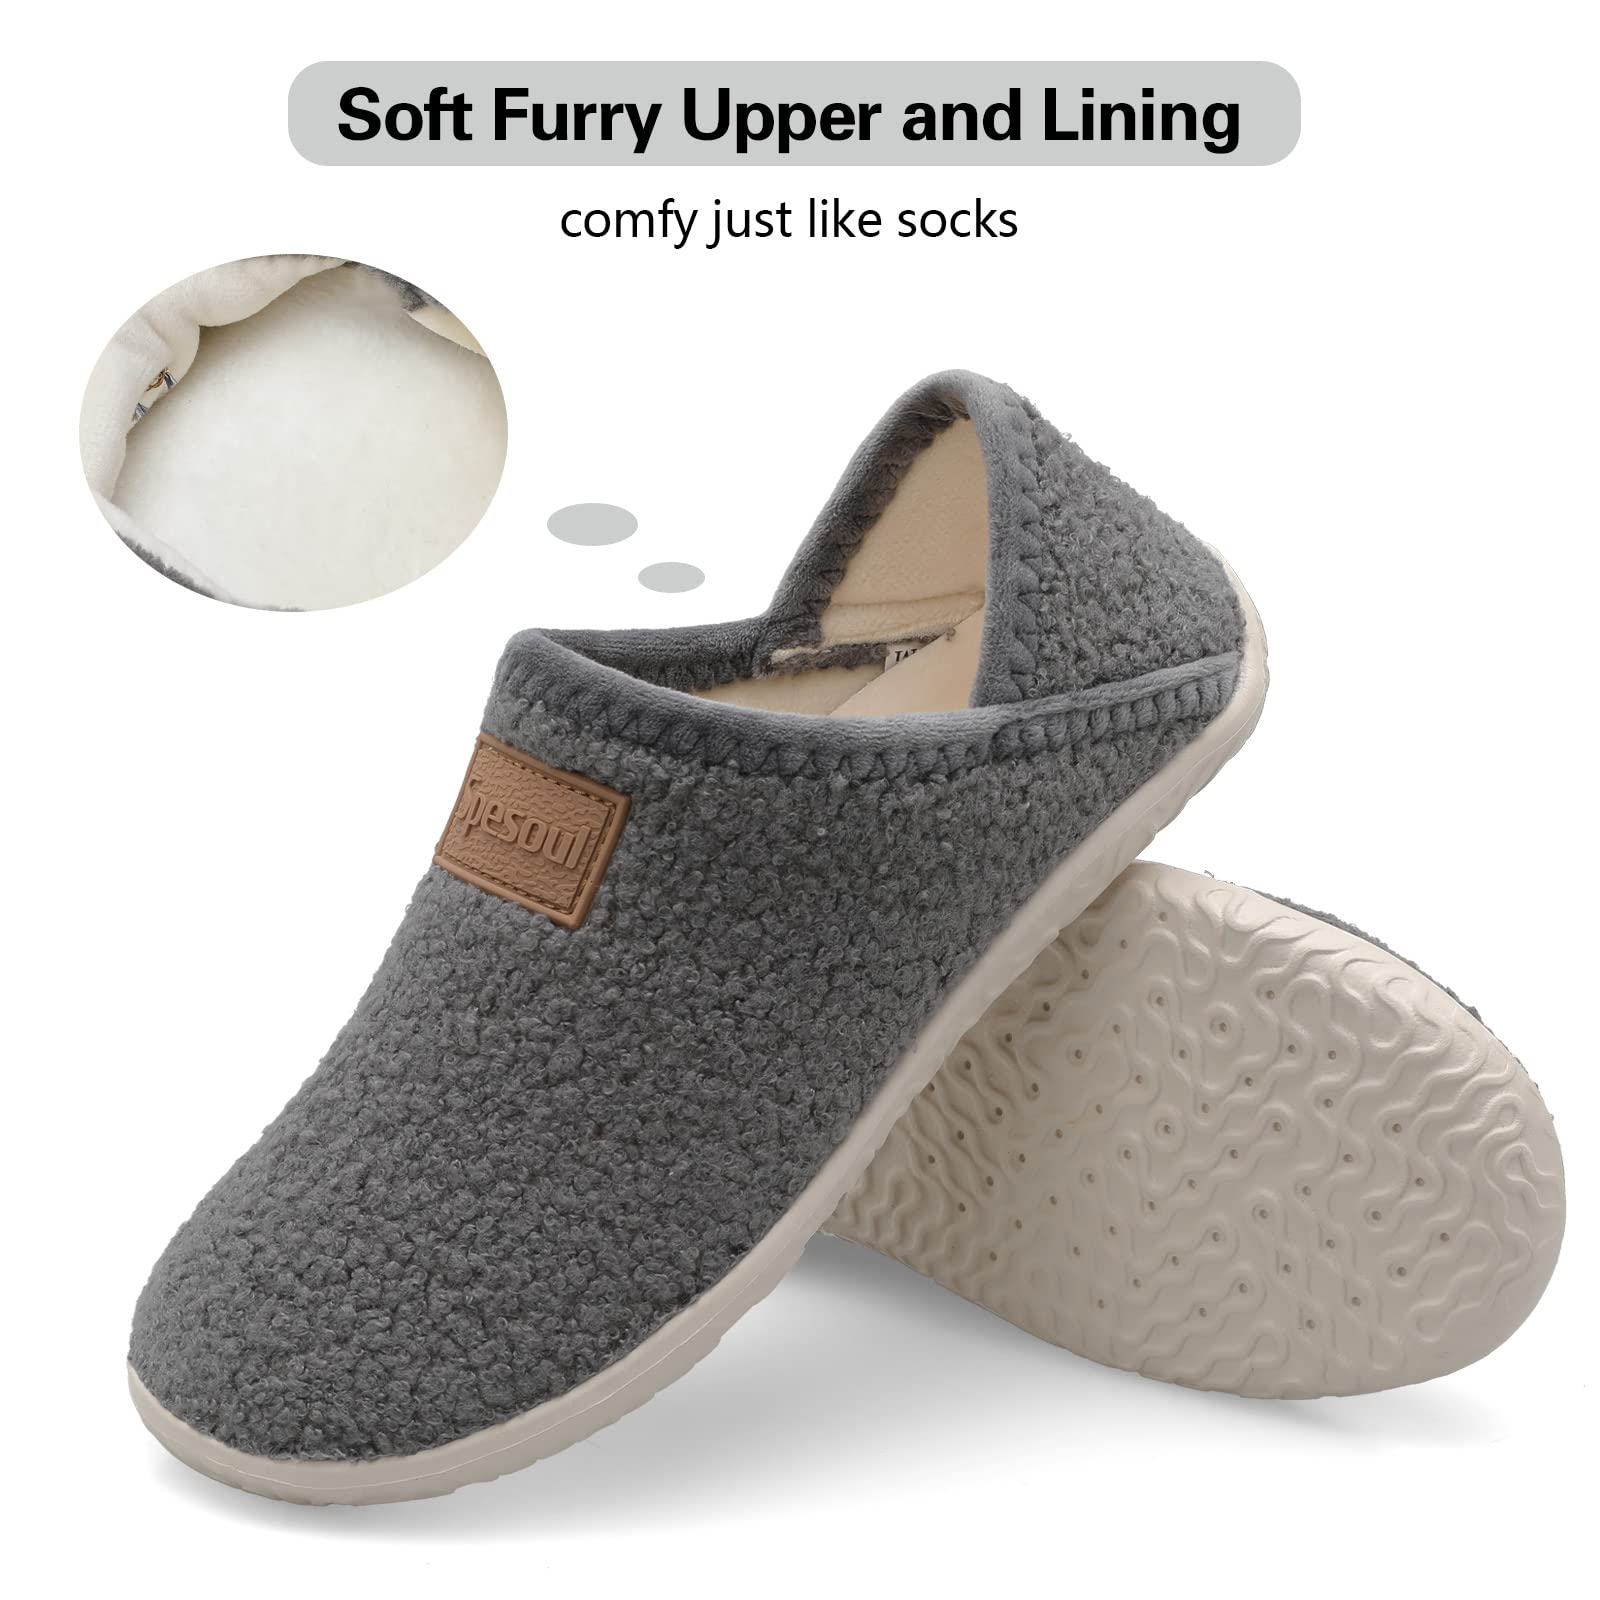 Fuzzy House Slippers for Women Men Indoor Closed Back Lightweight Cozy Faux Furry Lining Barefoot House Shoes Slipper Socks for Bedroom Home Office Yoga Outdoor Walking Shoes